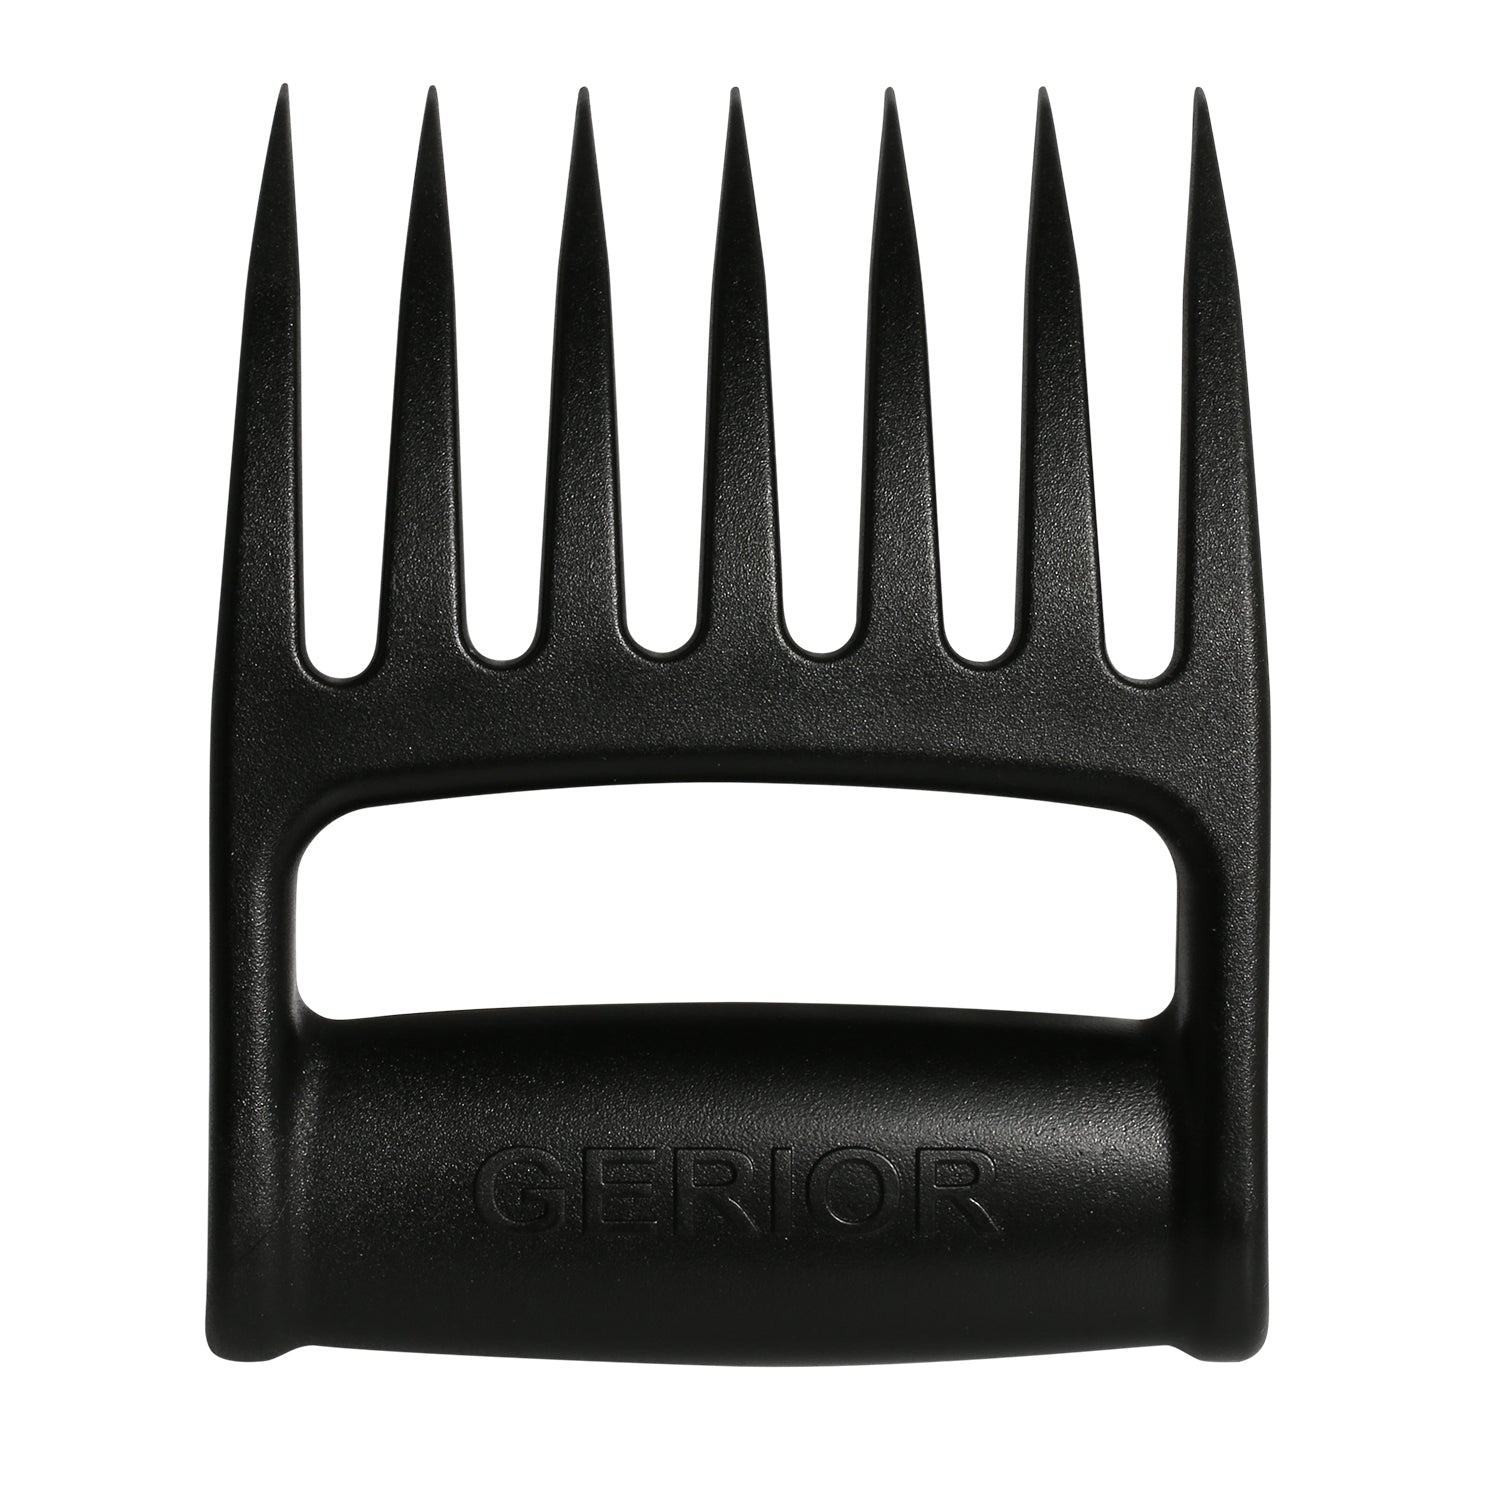 Arres Pulled Pork Claws & Meat Shredder - BBQ Grill Tools and Smoking  Accessories for Carving, Handling, Lifting (Meat claws)